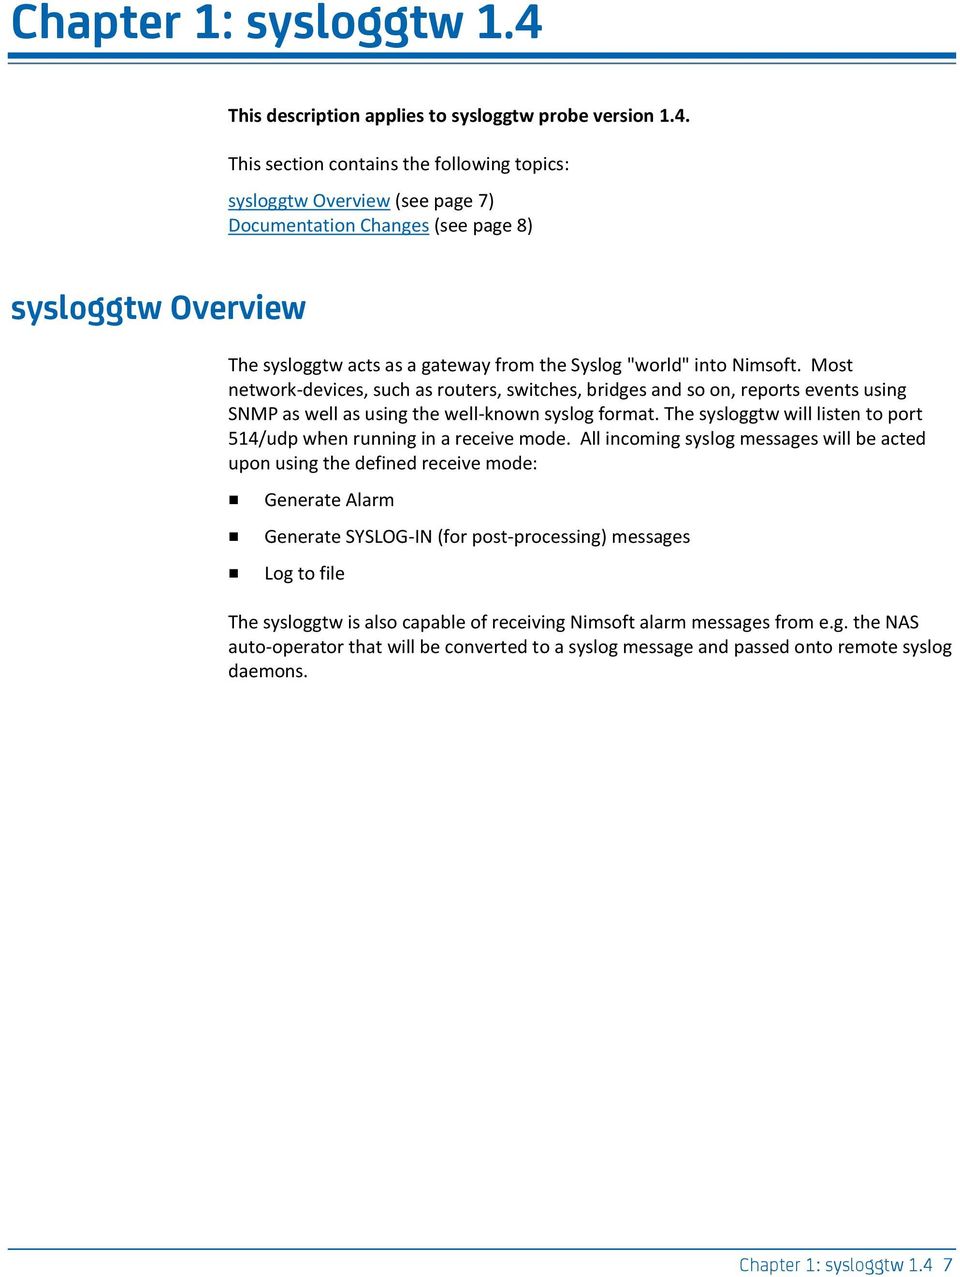 This section contains the following topics: sysloggtw Overview (see page 7) Documentation Changes (see page 8) sysloggtw Overview The sysloggtw acts as a gateway from the Syslog "world" into Nimsoft.